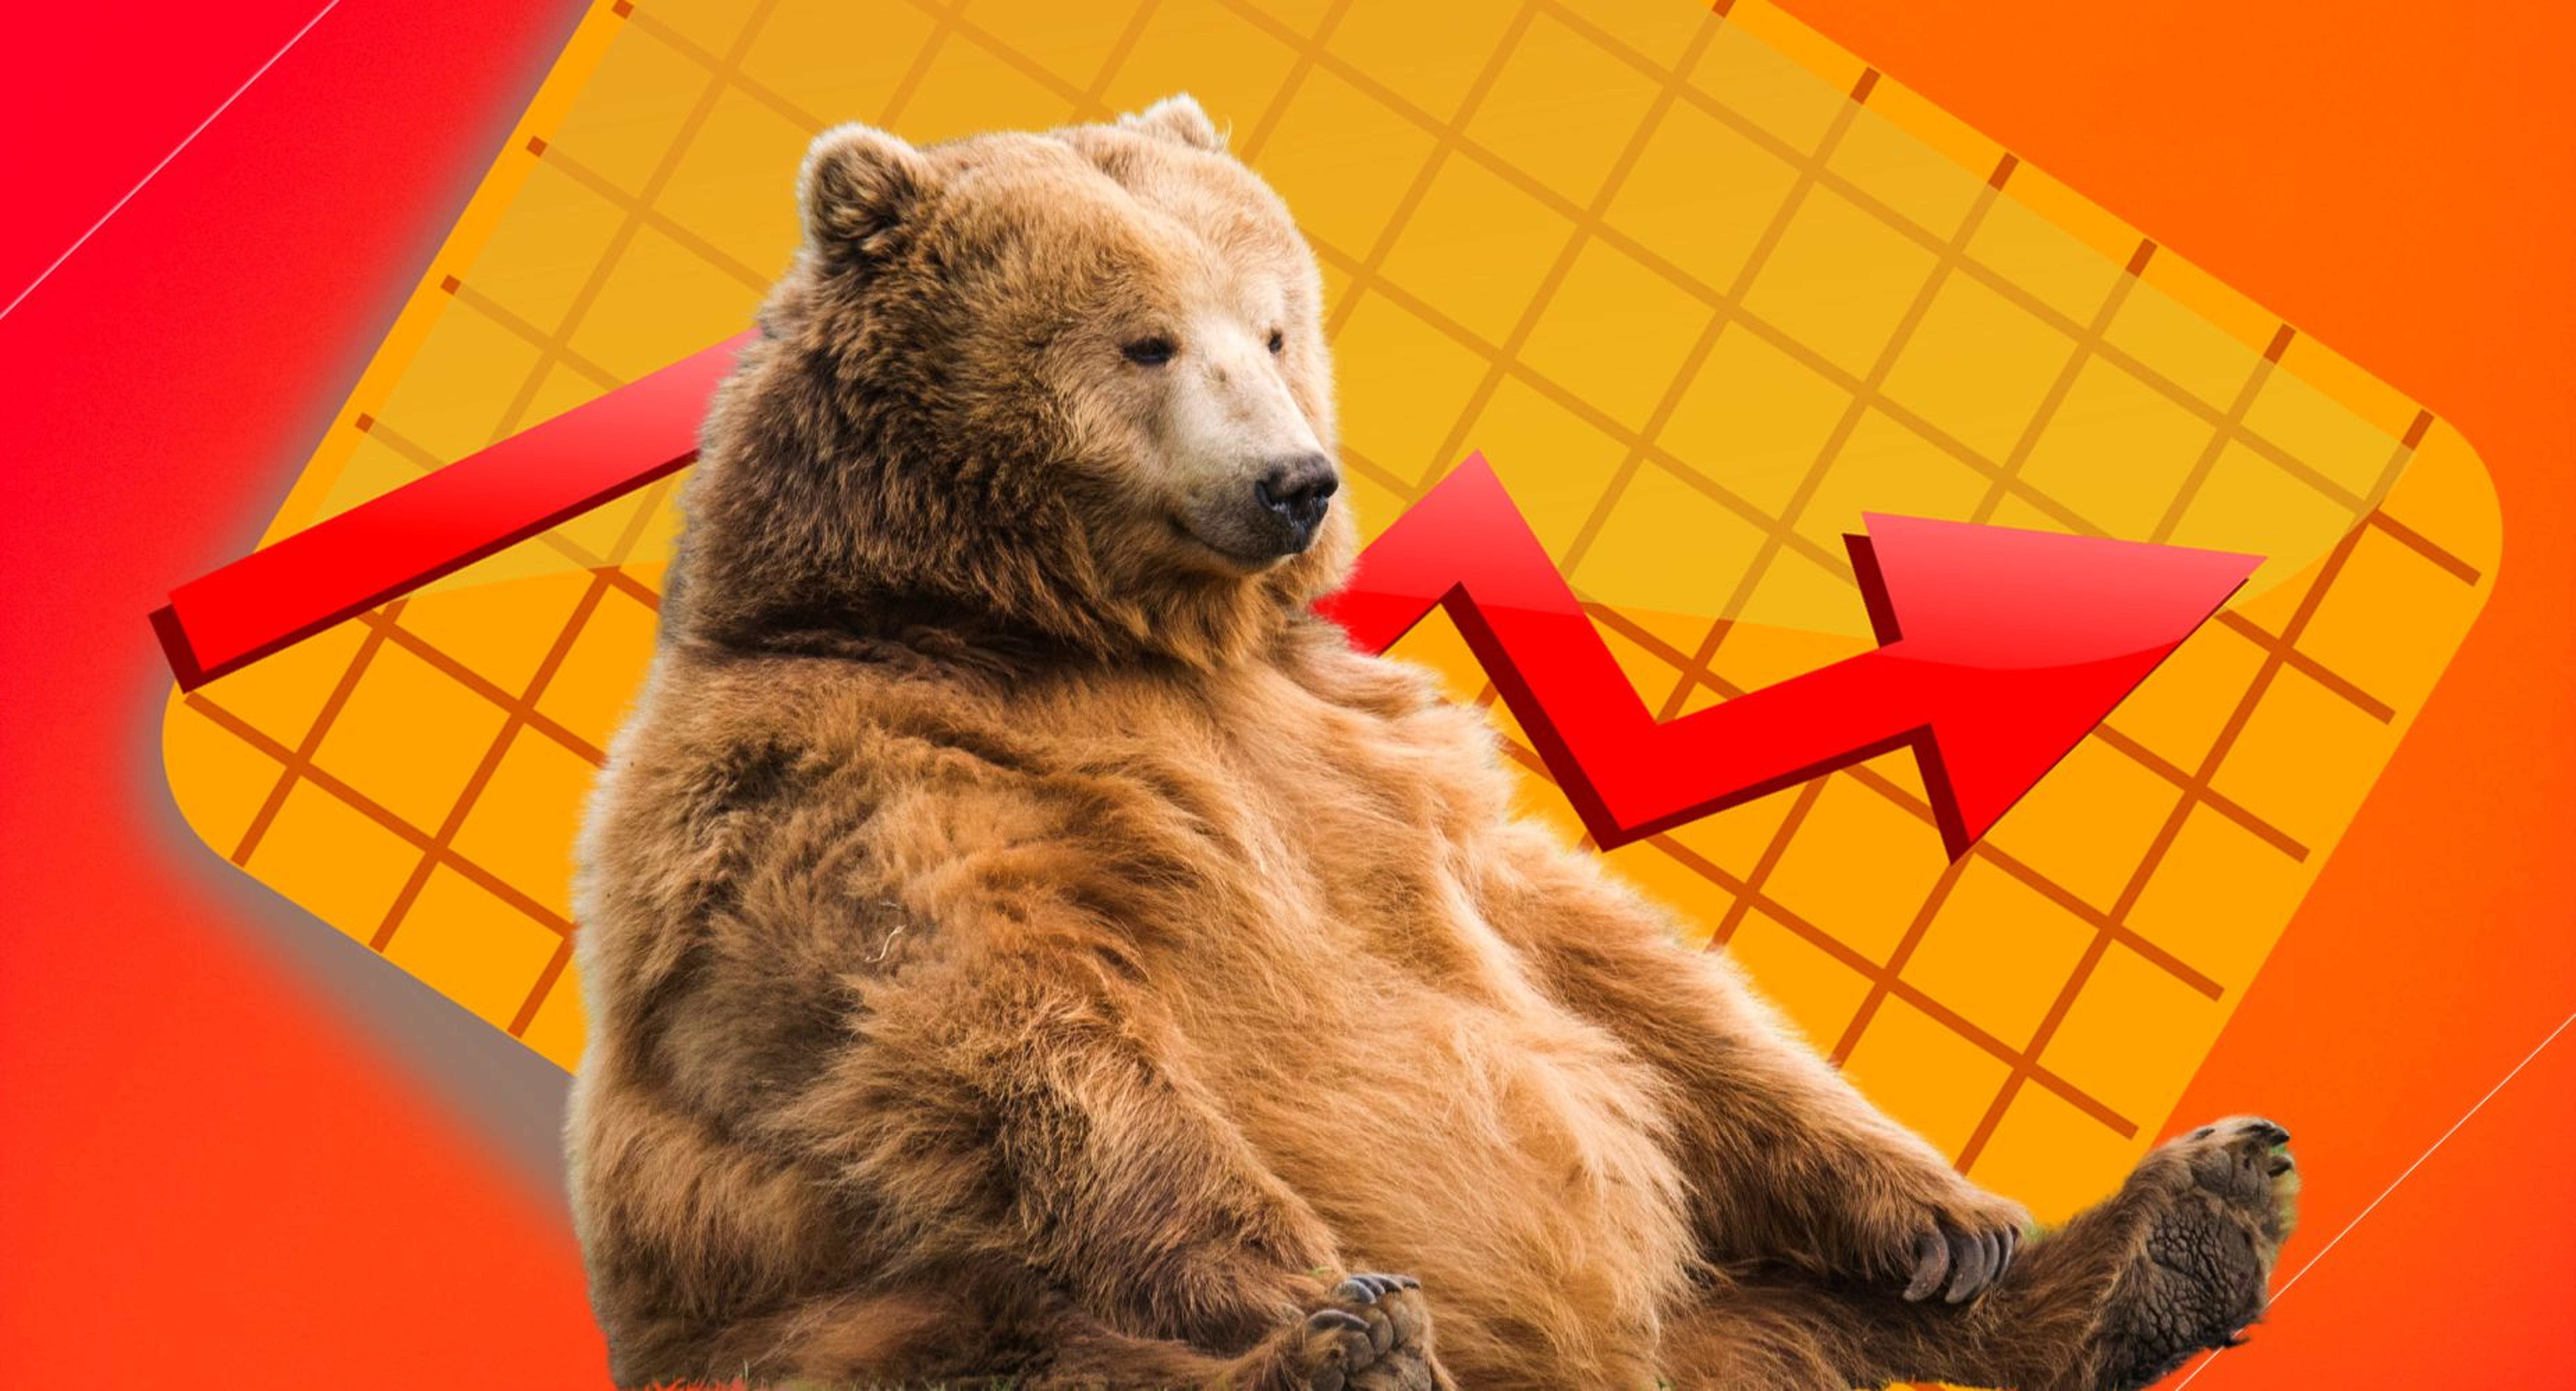 Short Sellers Are Ramping Up Their Bets Against Tech Stocks: Analyst Says This May Be A &#39;Bear Rally&#39;